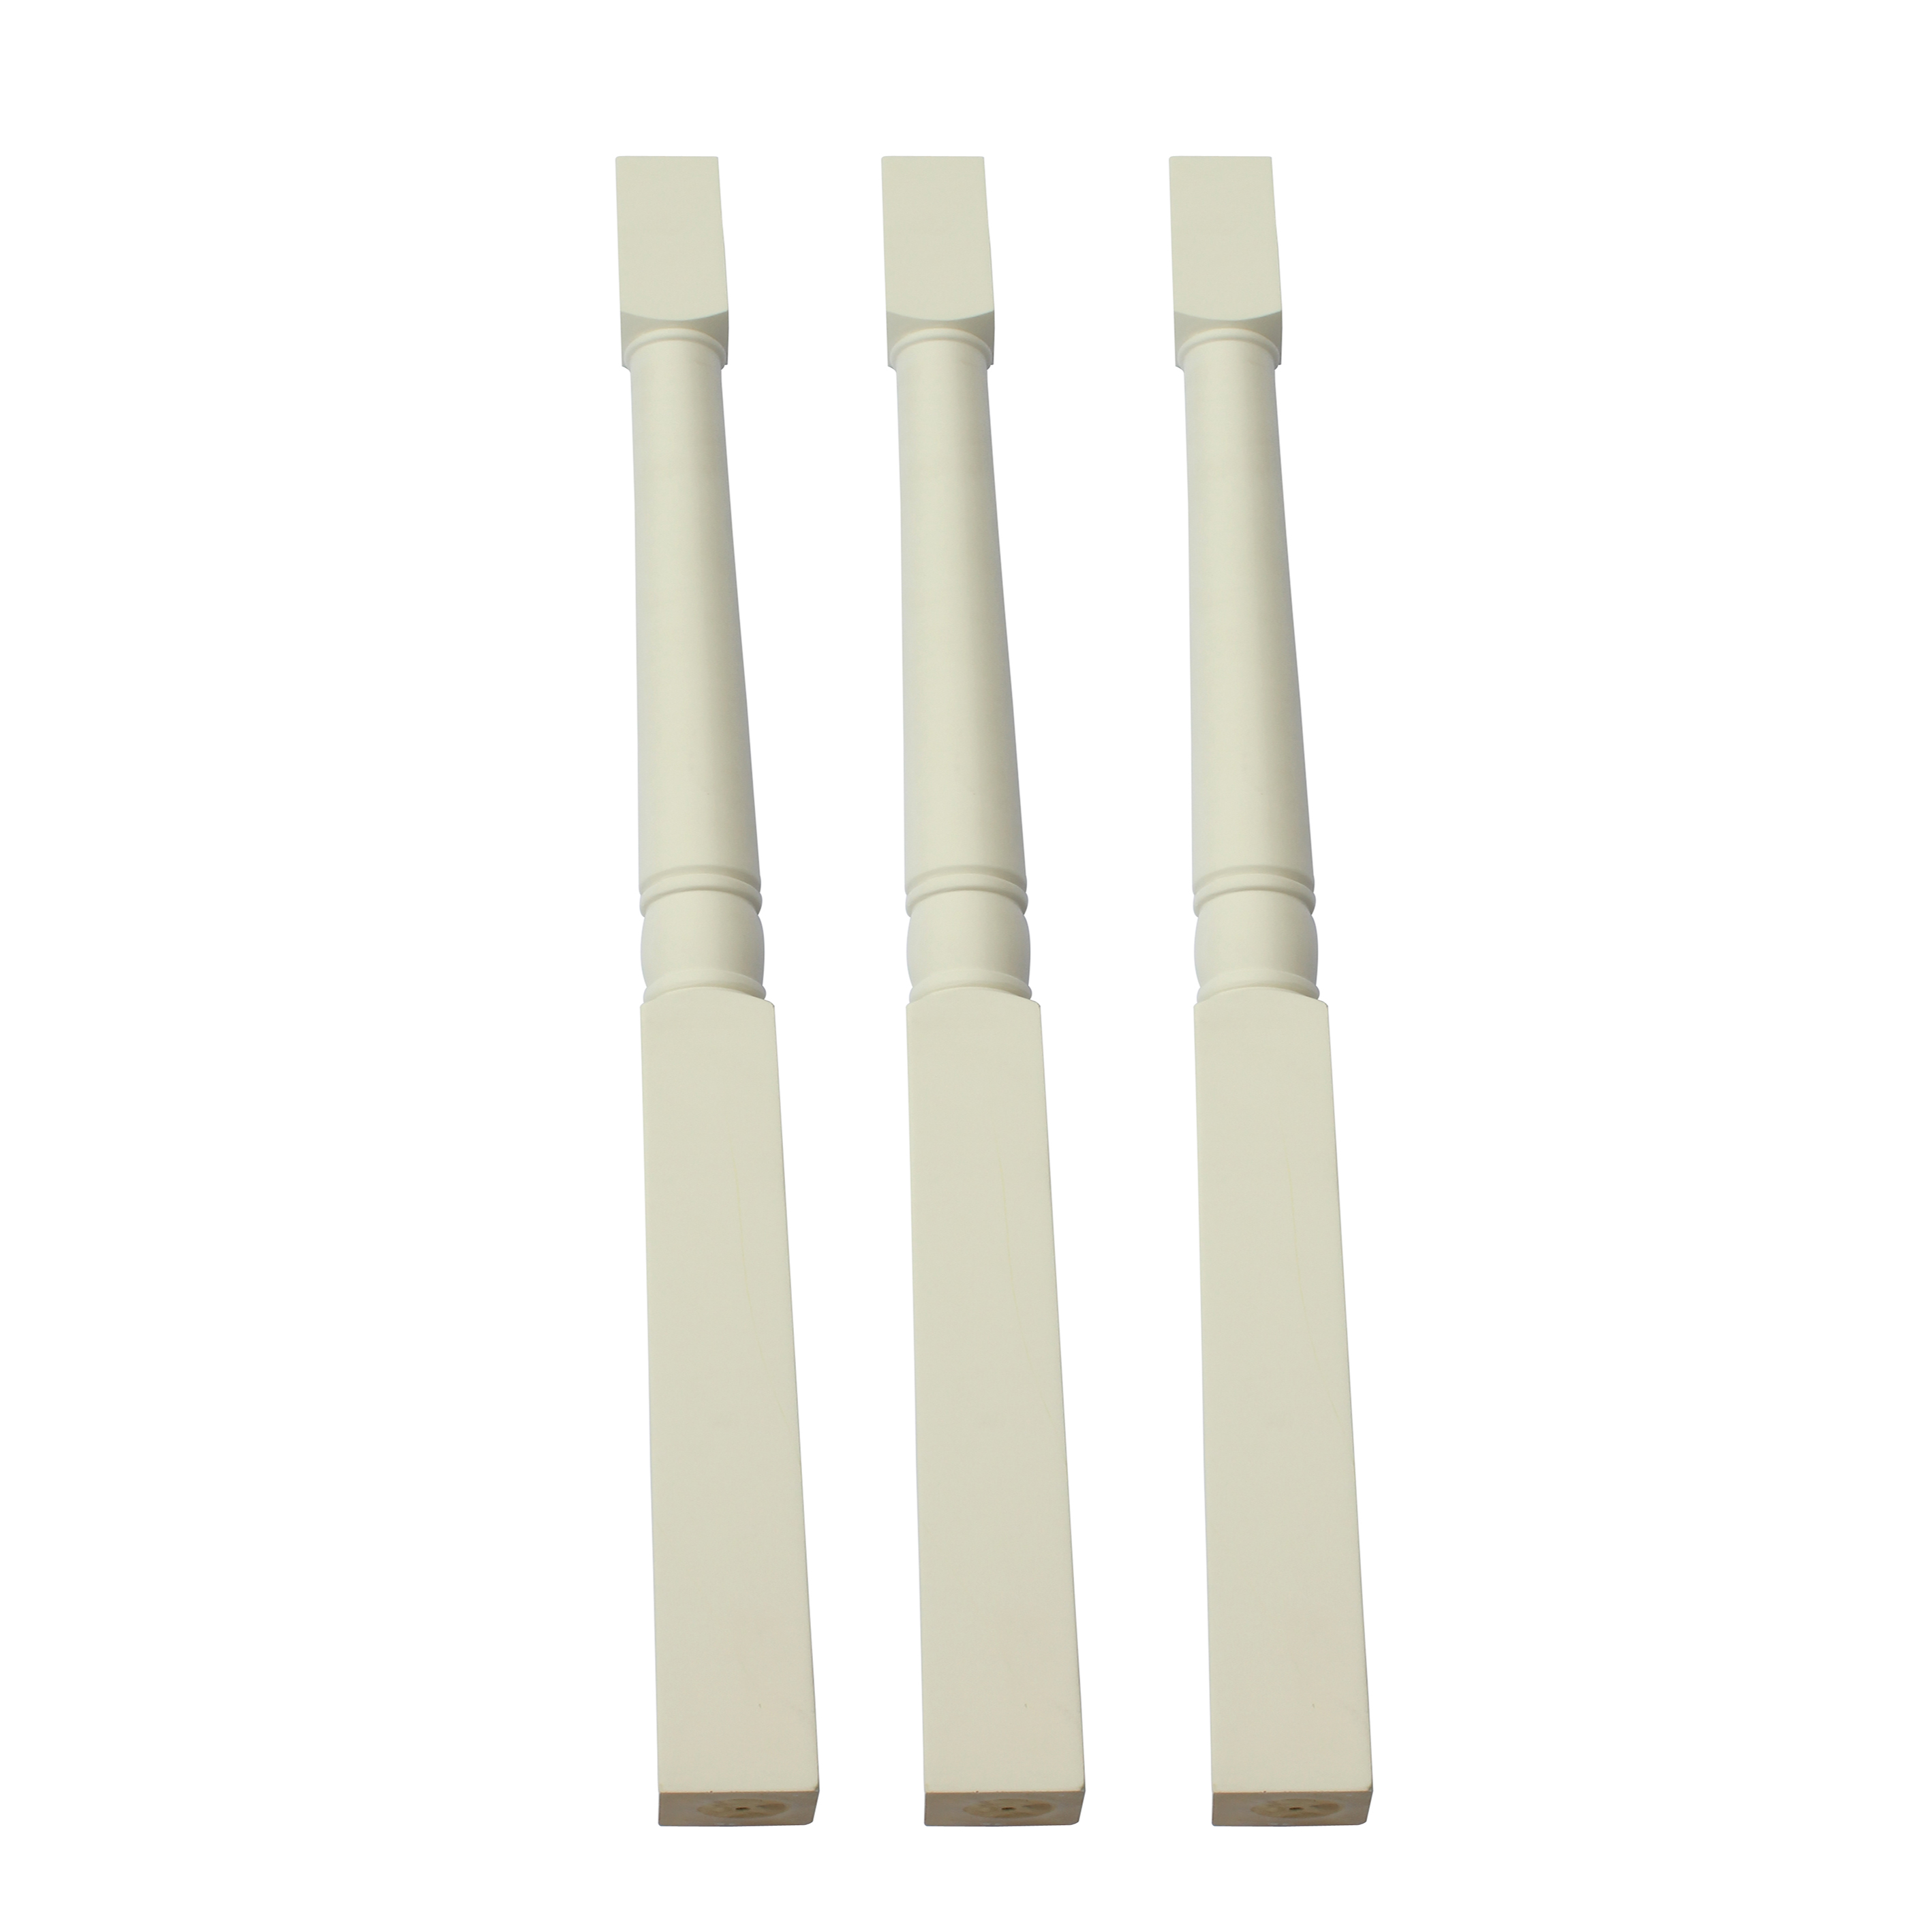 Customized Reliable Hot-selling Polyurethane Baluster of HIigh Quality